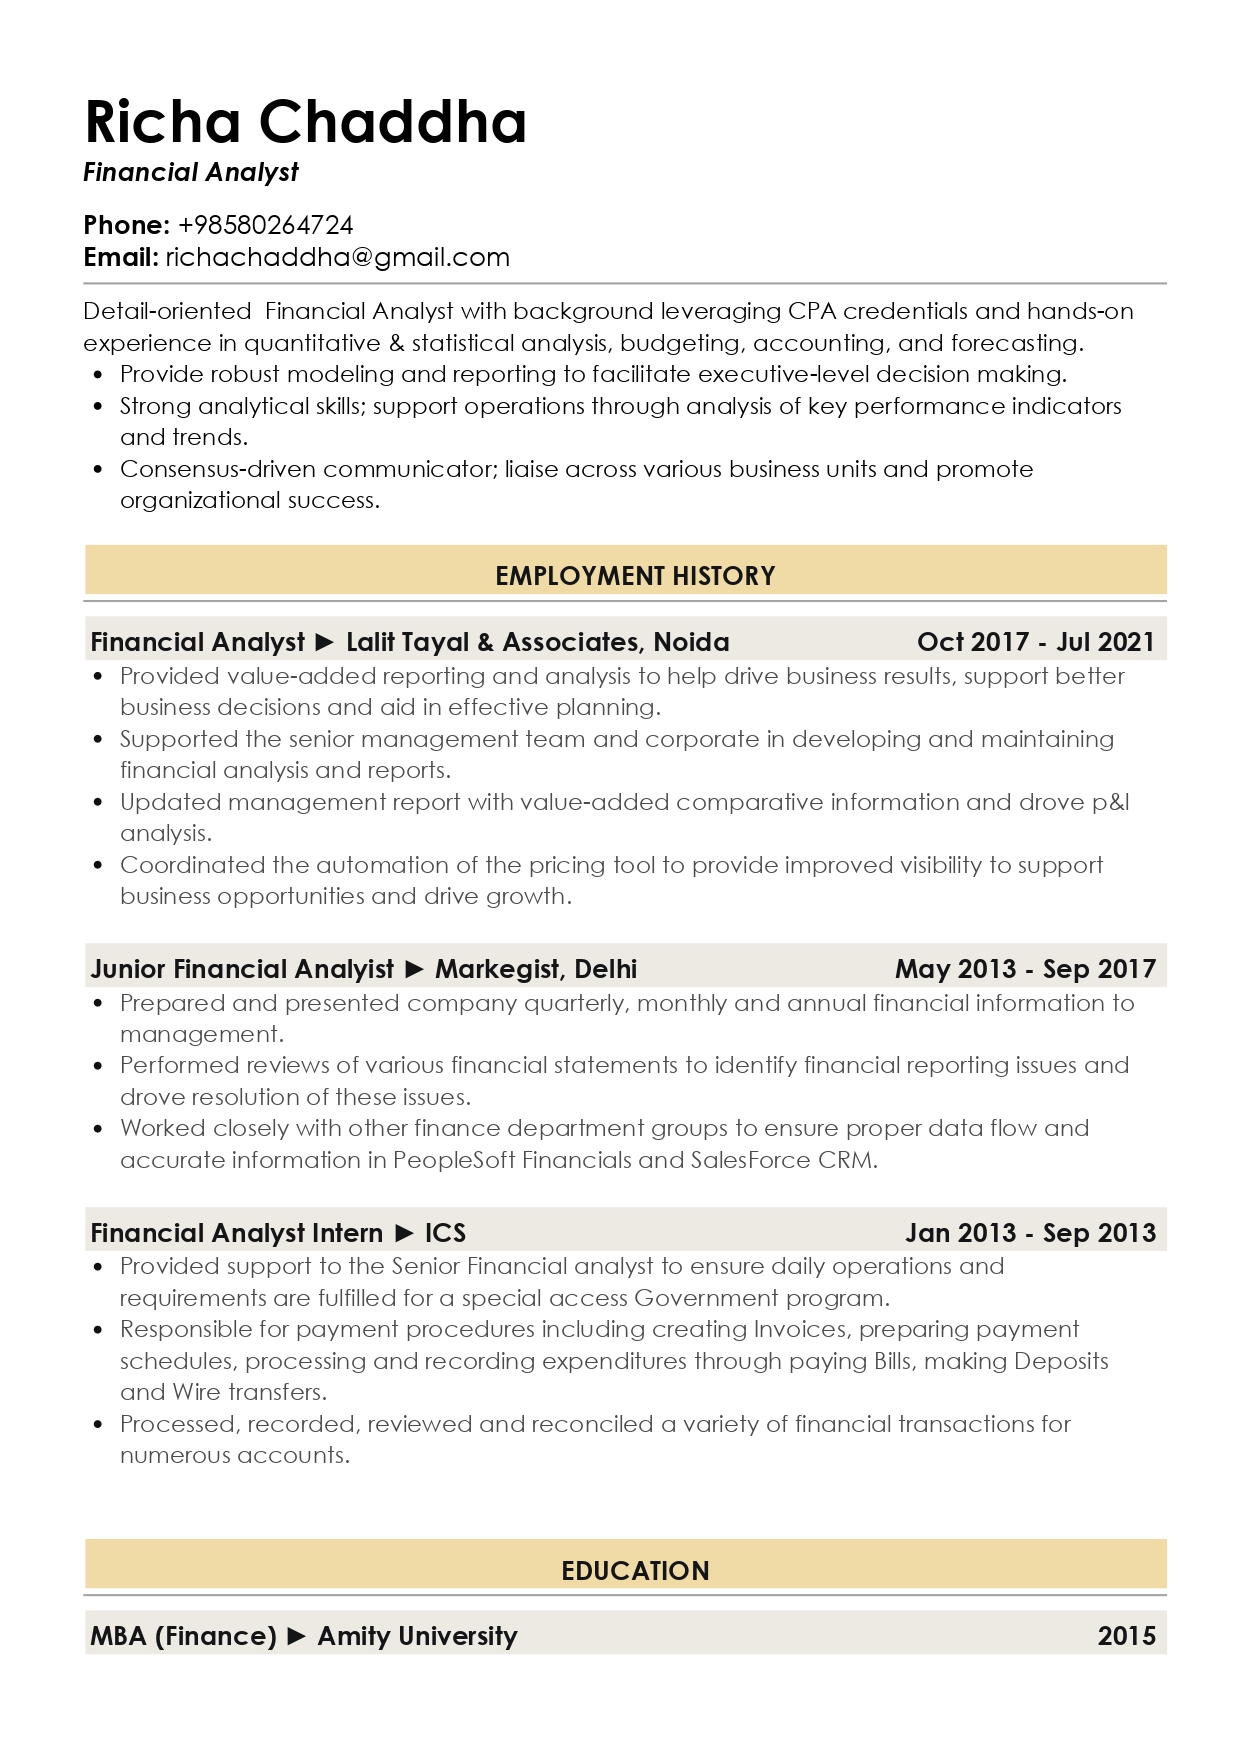 Resume of Financial Analyst